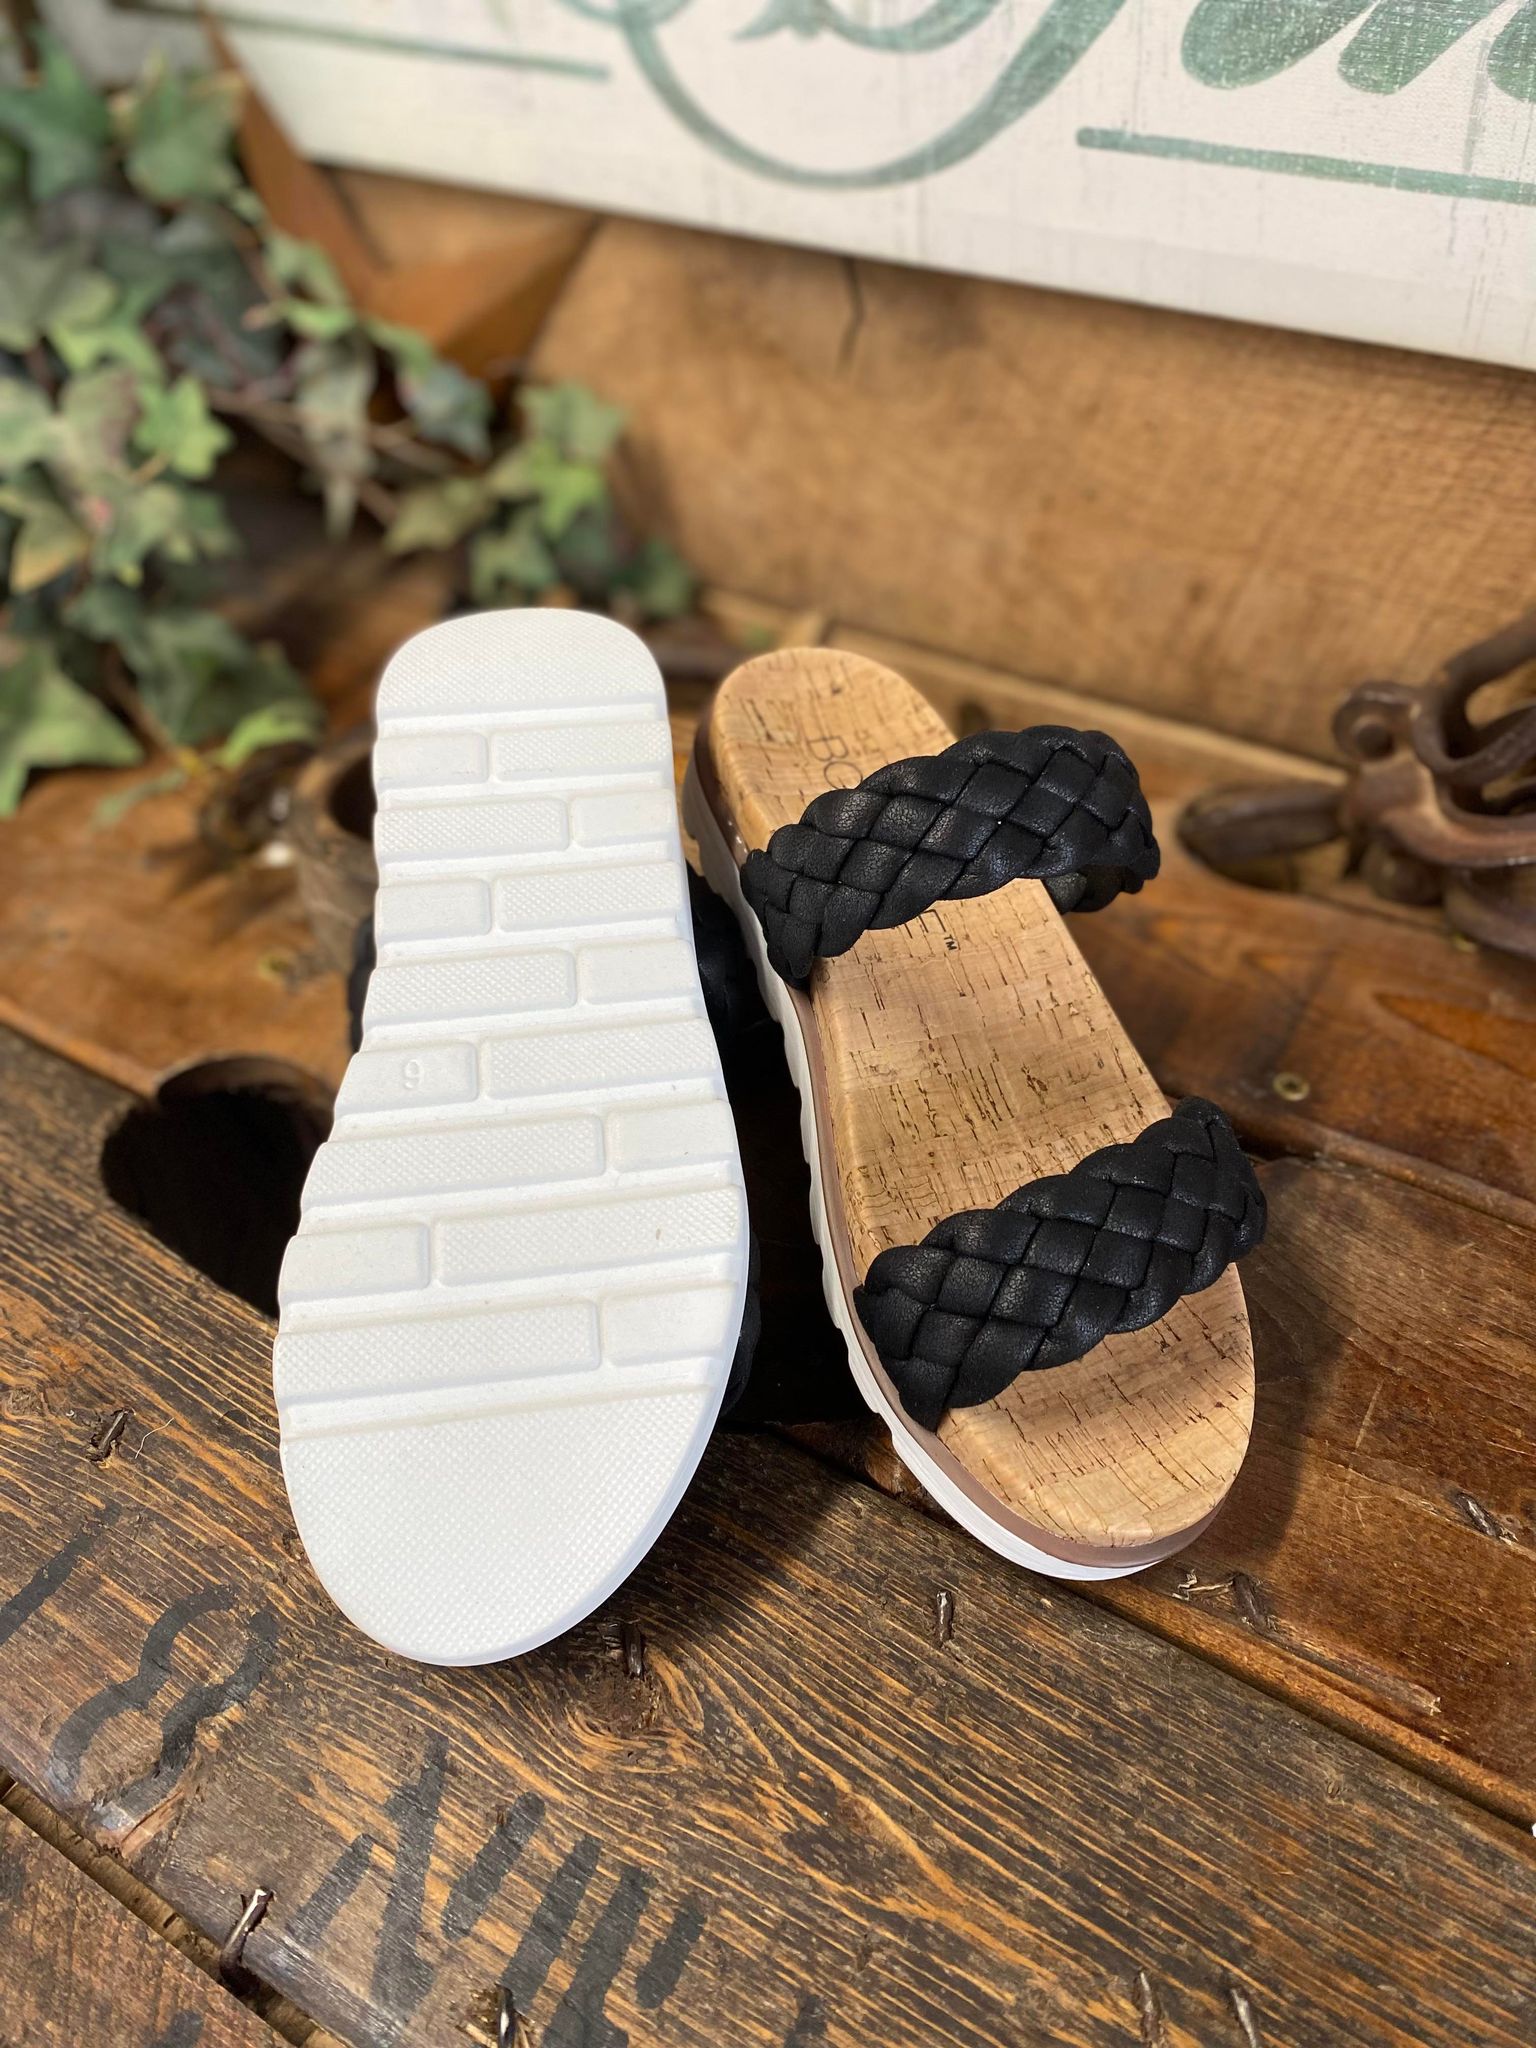 Moonlight Sandal by Boutique in Black-Women's Casual Shoes-Corkys Footwear-Lucky J Boots & More, Women's, Men's, & Kids Western Store Located in Carthage, MO